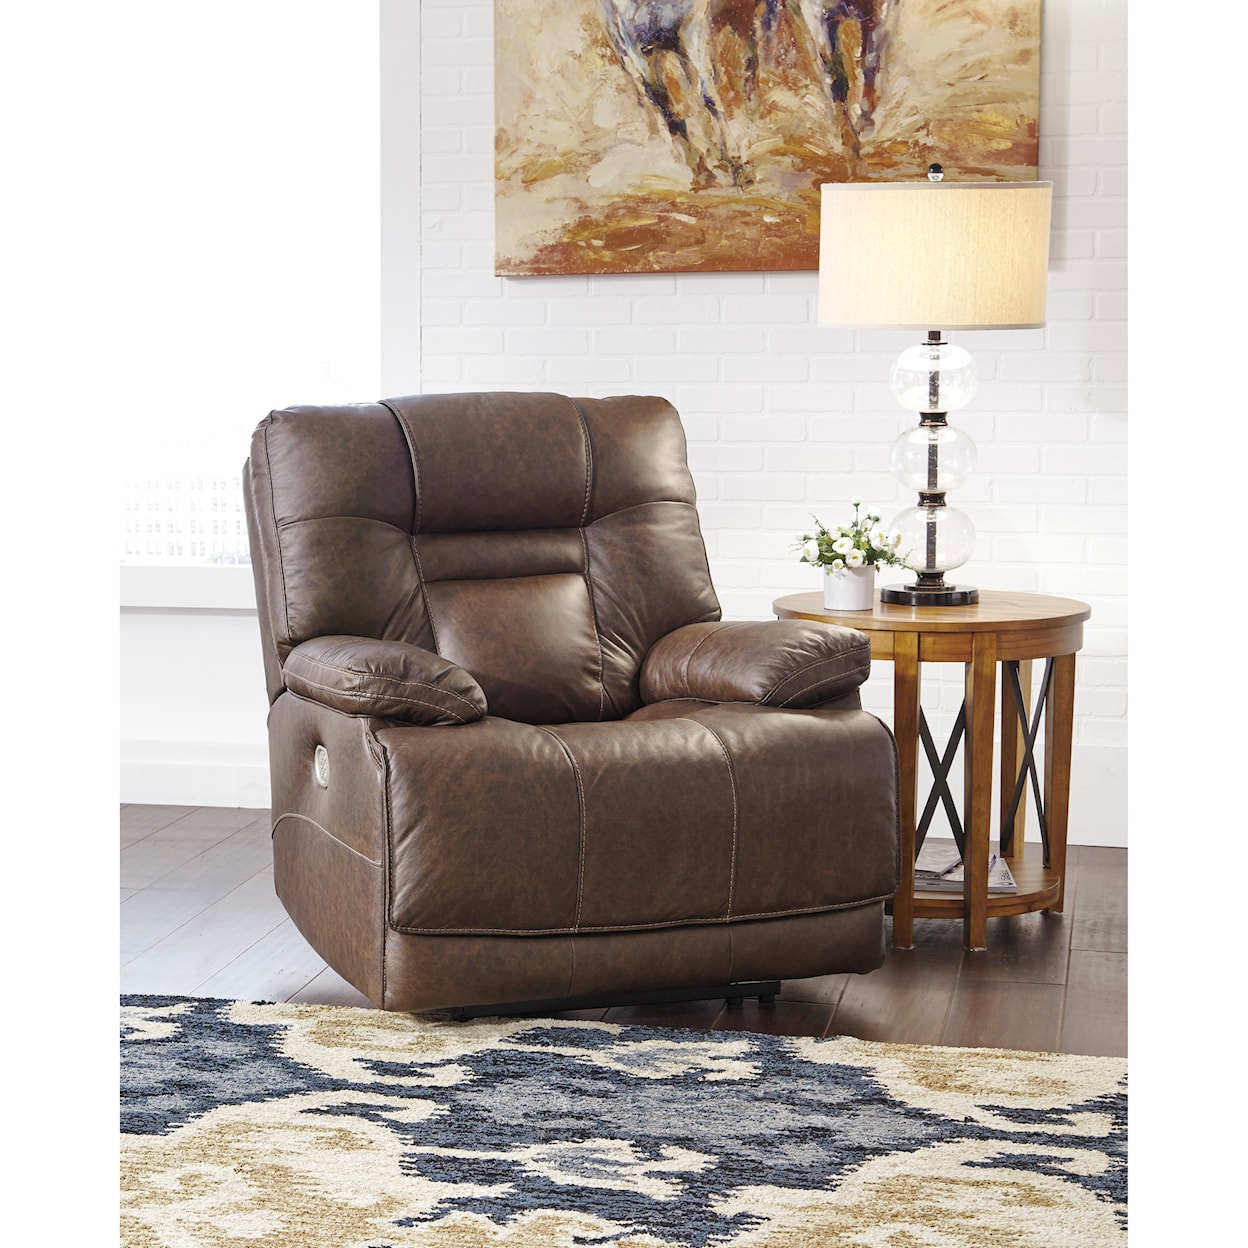 Signature Wurstrow Leather TRIPLE Power Recliner